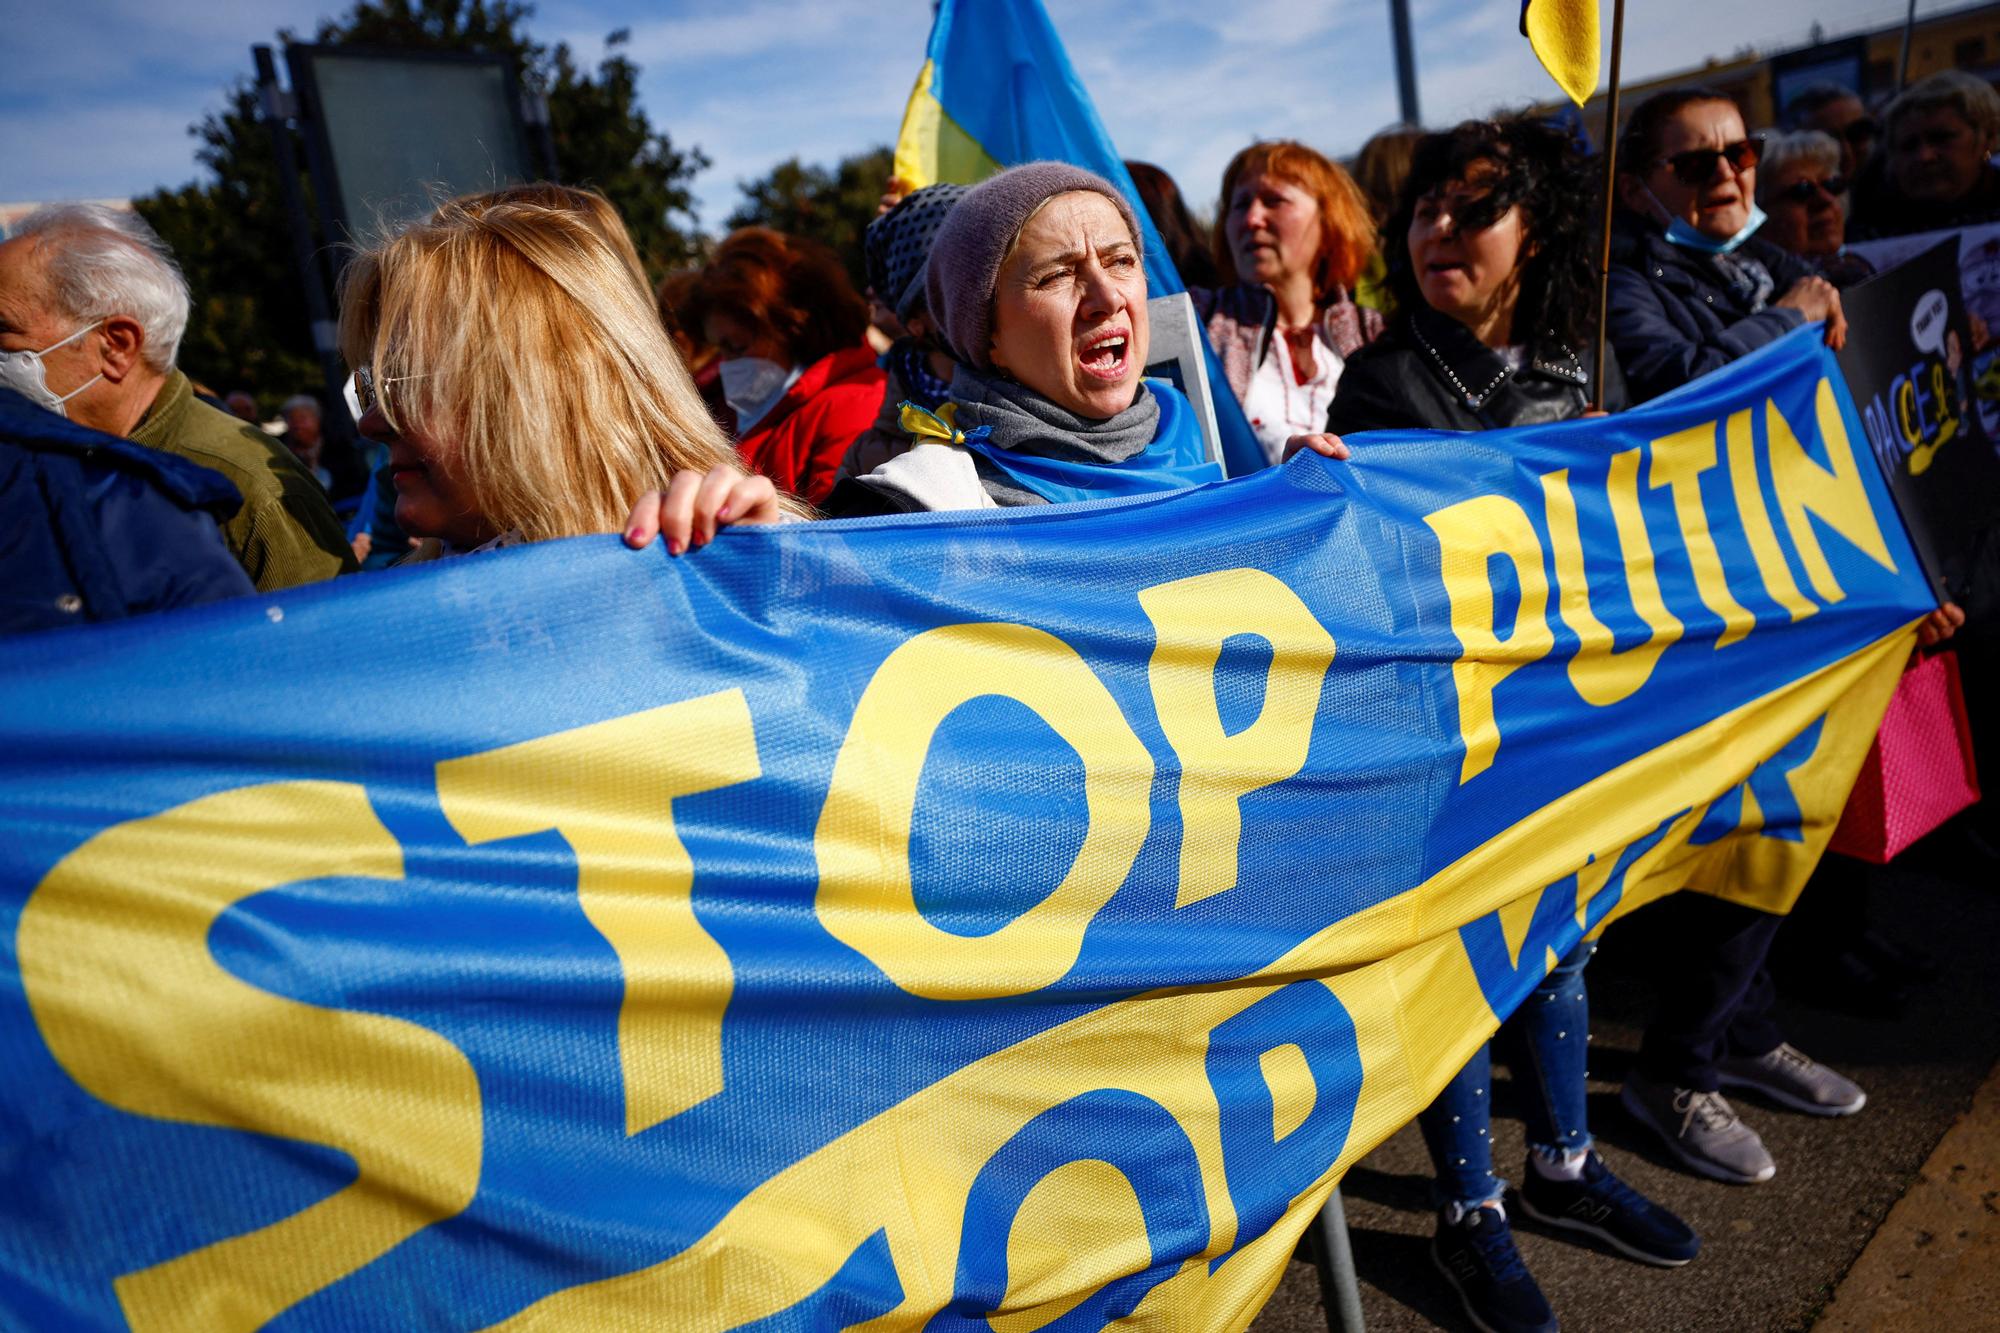 People protest in support of Ukraine, in Rome